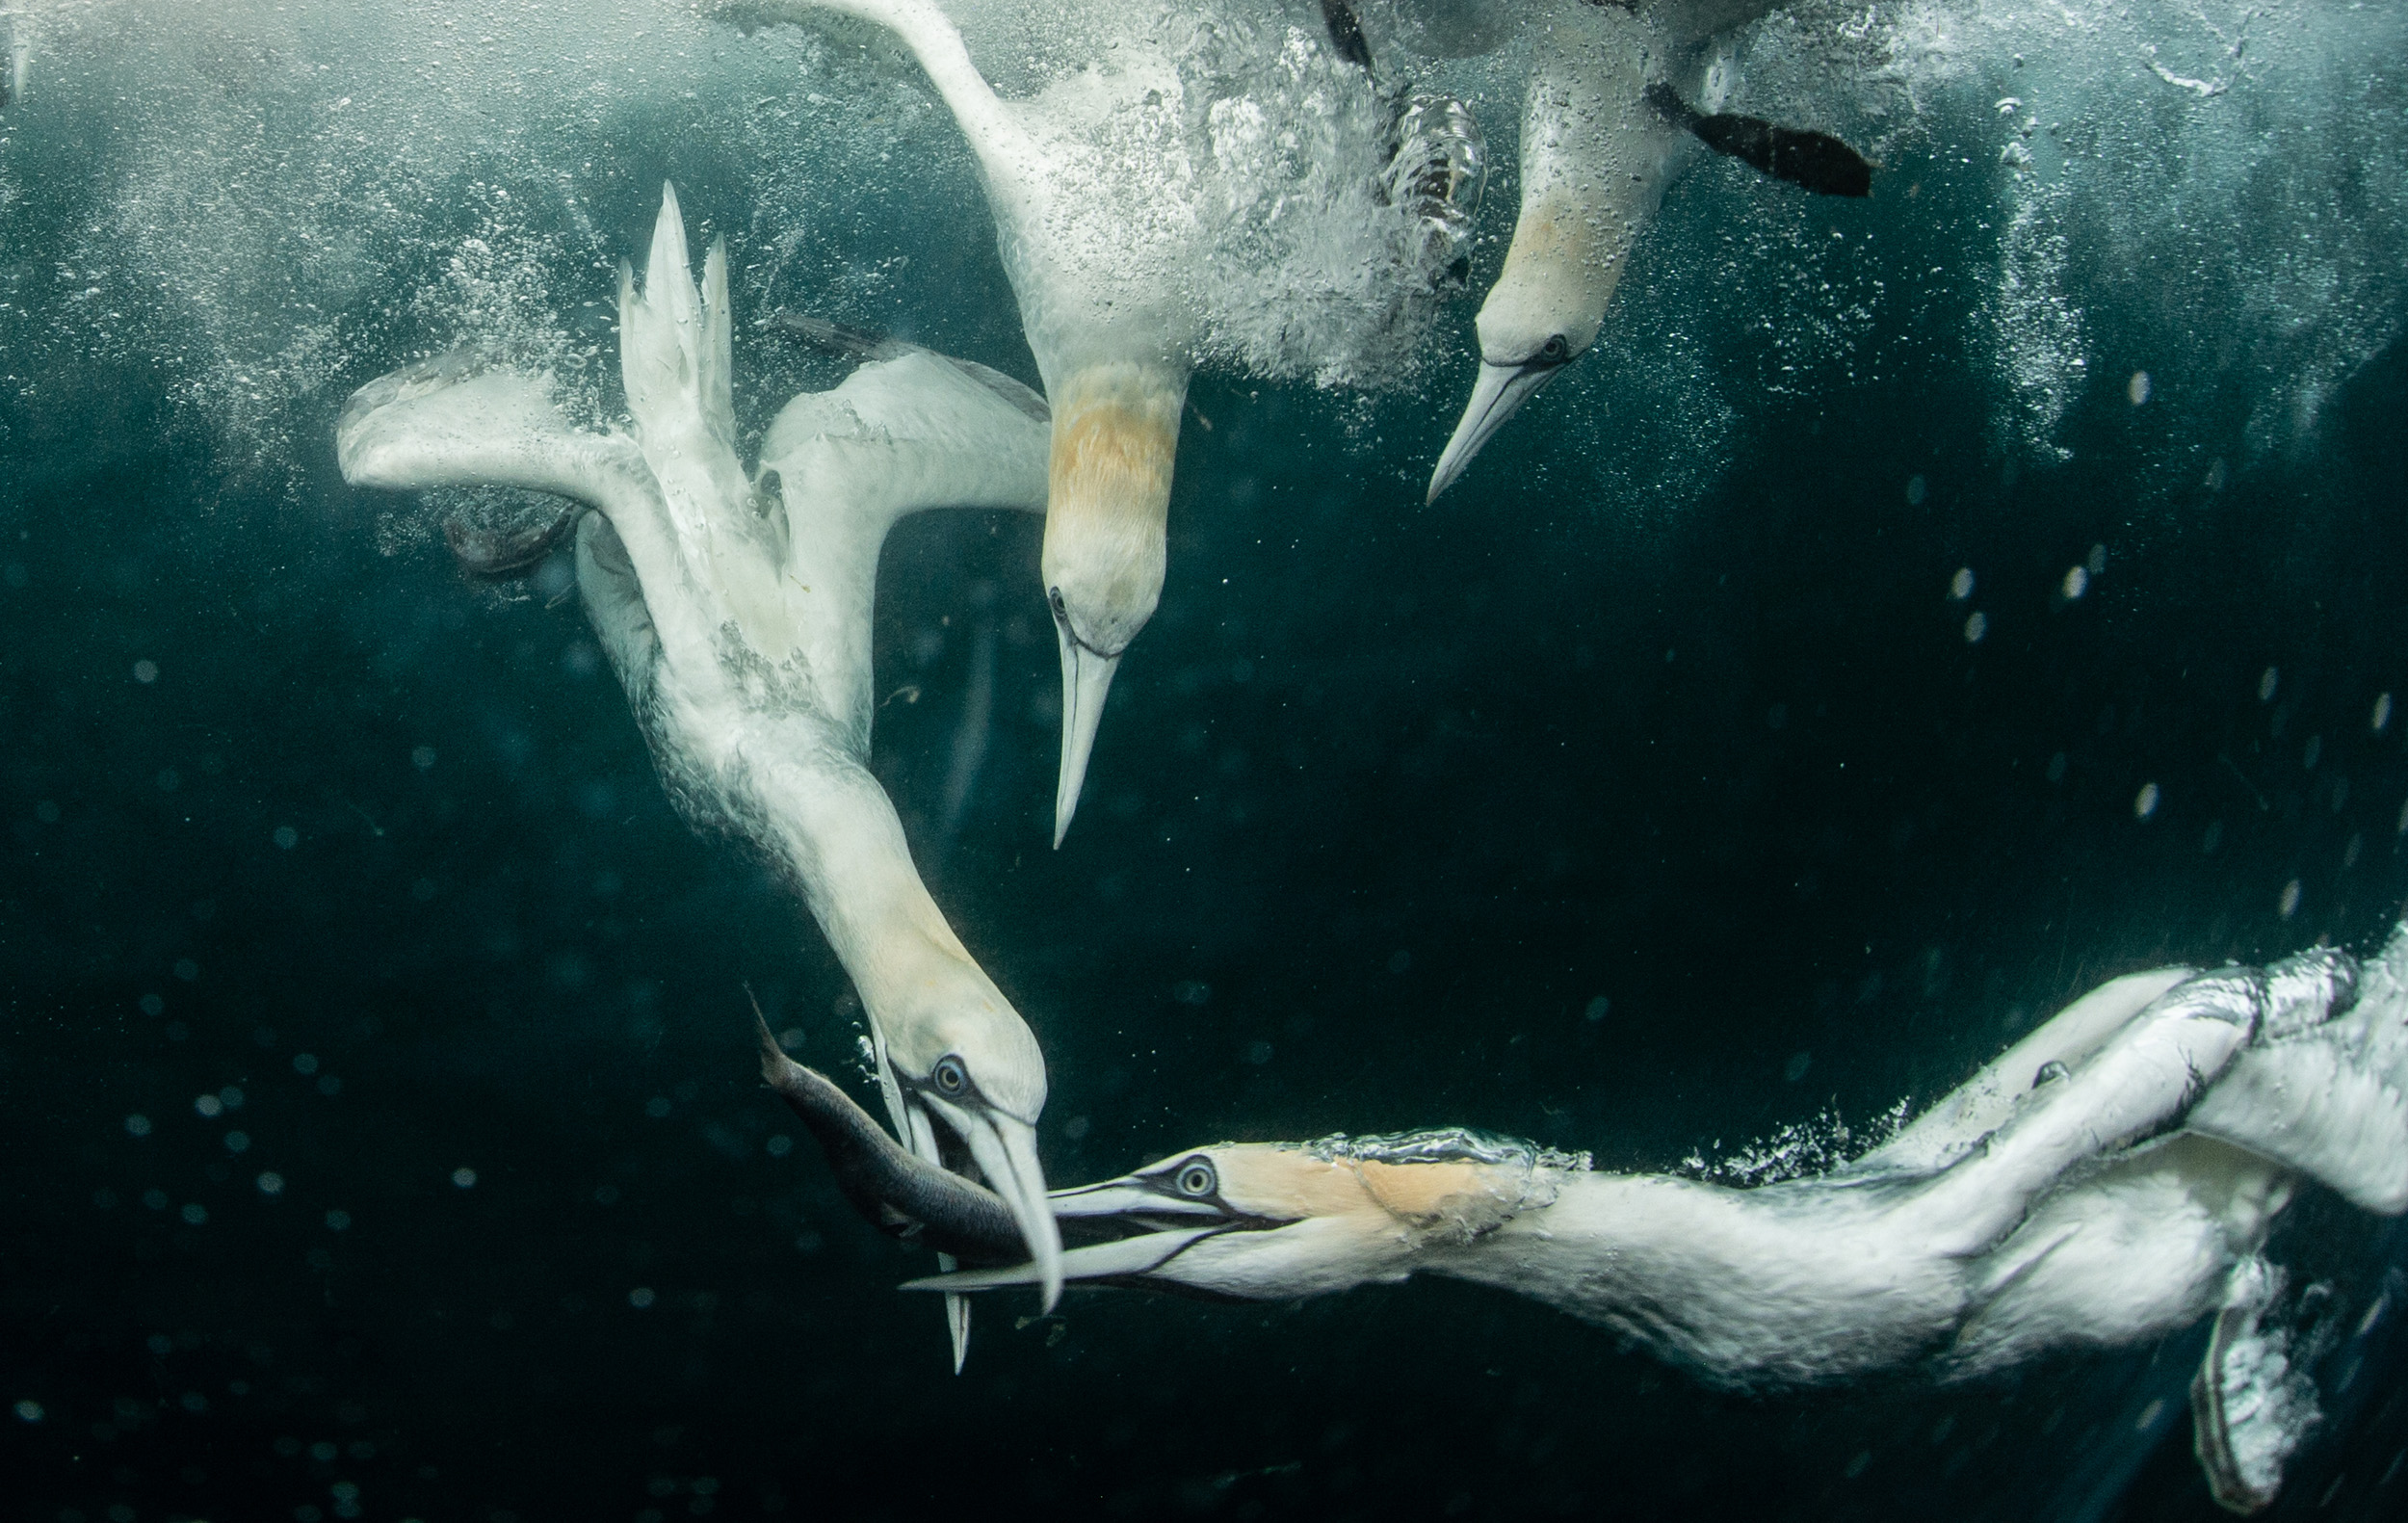 A group of Gannets diving underwater for fish.